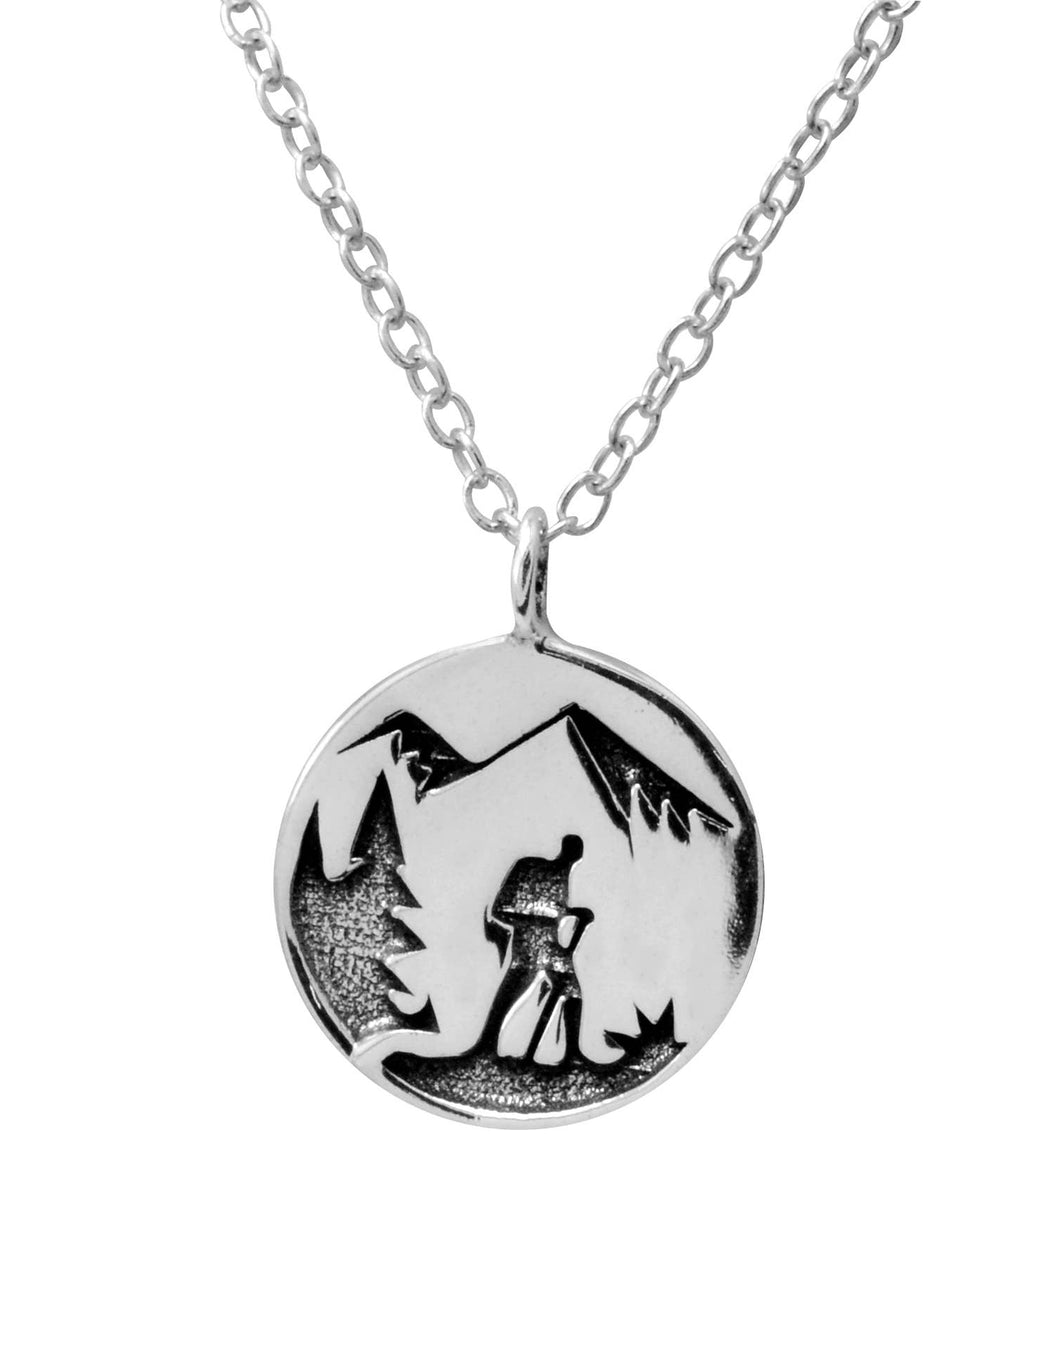 Hiking - Sterling Silver Delicate Necklace